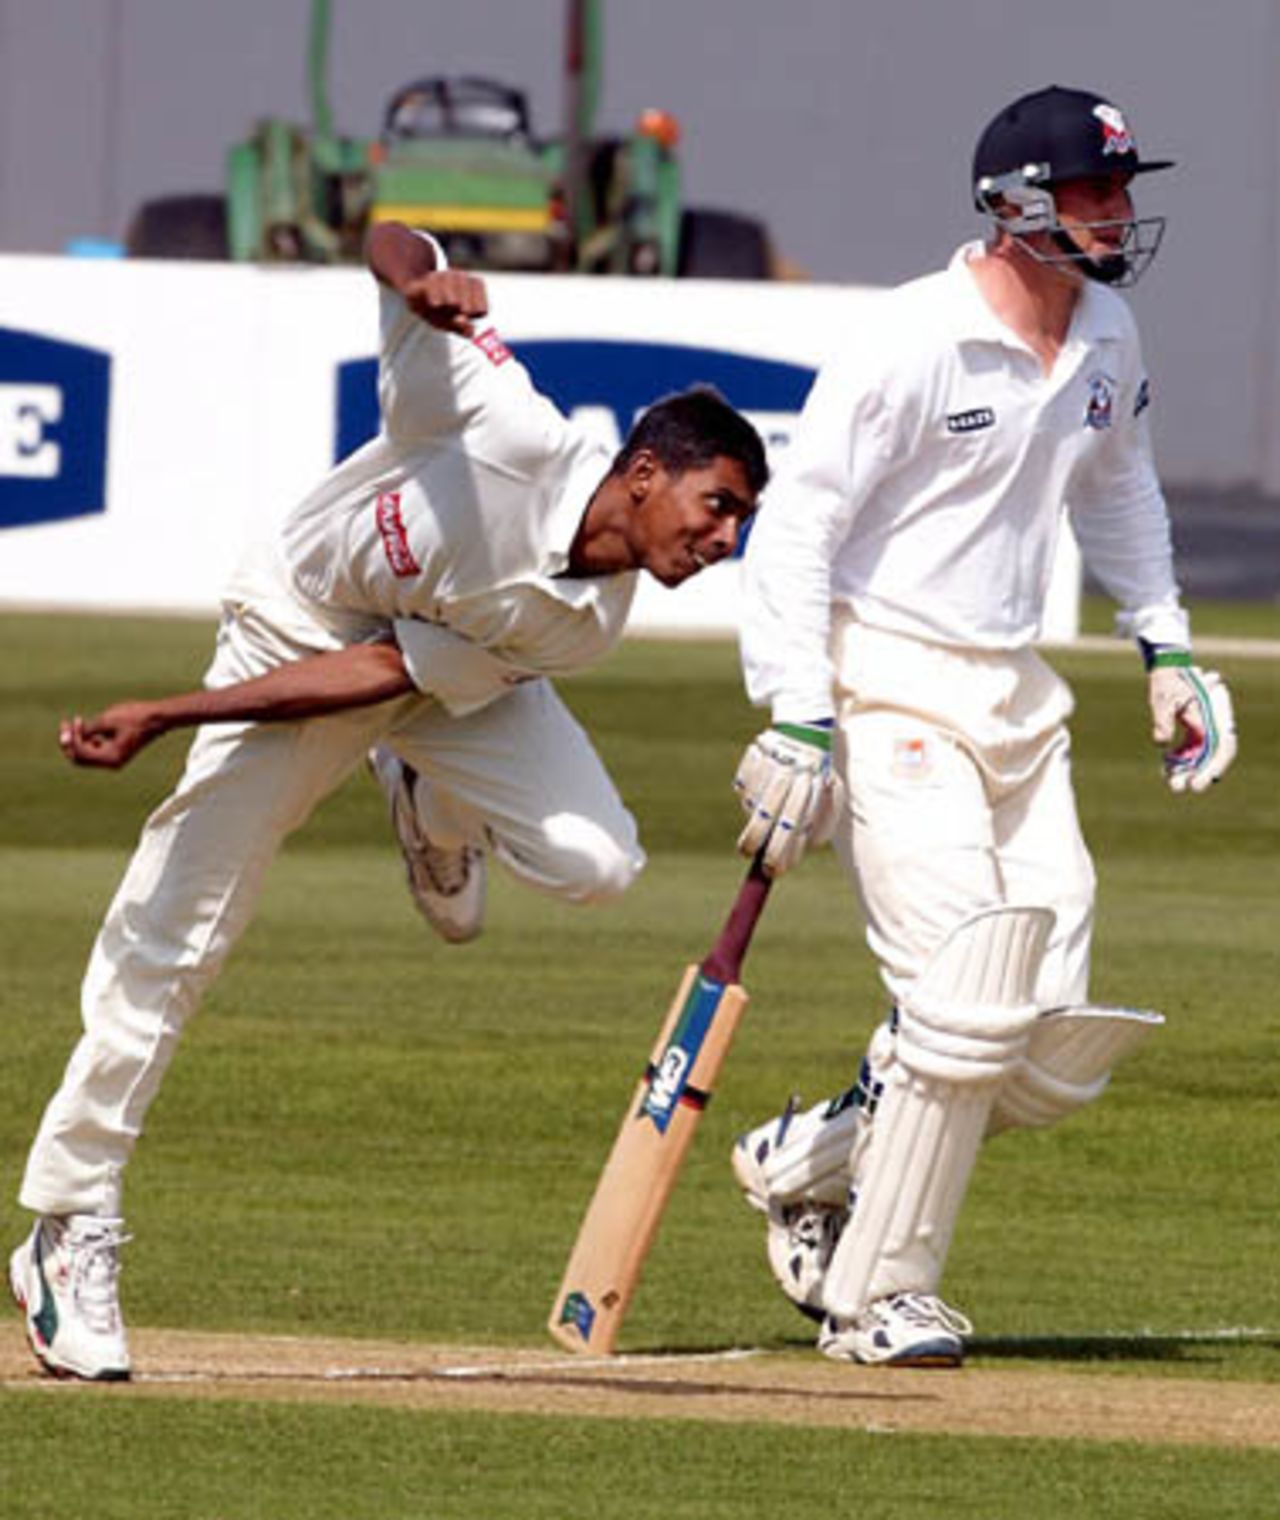 Bangladeshi bowler Manjural Islam delivers a ball during his spell of 4-105 from 38 overs. Auckland batsman Matt Horne looks on from the non-striker's end. Tour match: Auckland v Bangladeshis at Eden Park Outer Oval, Auckland, 12-15 Dec 2001 (12 December 2001).